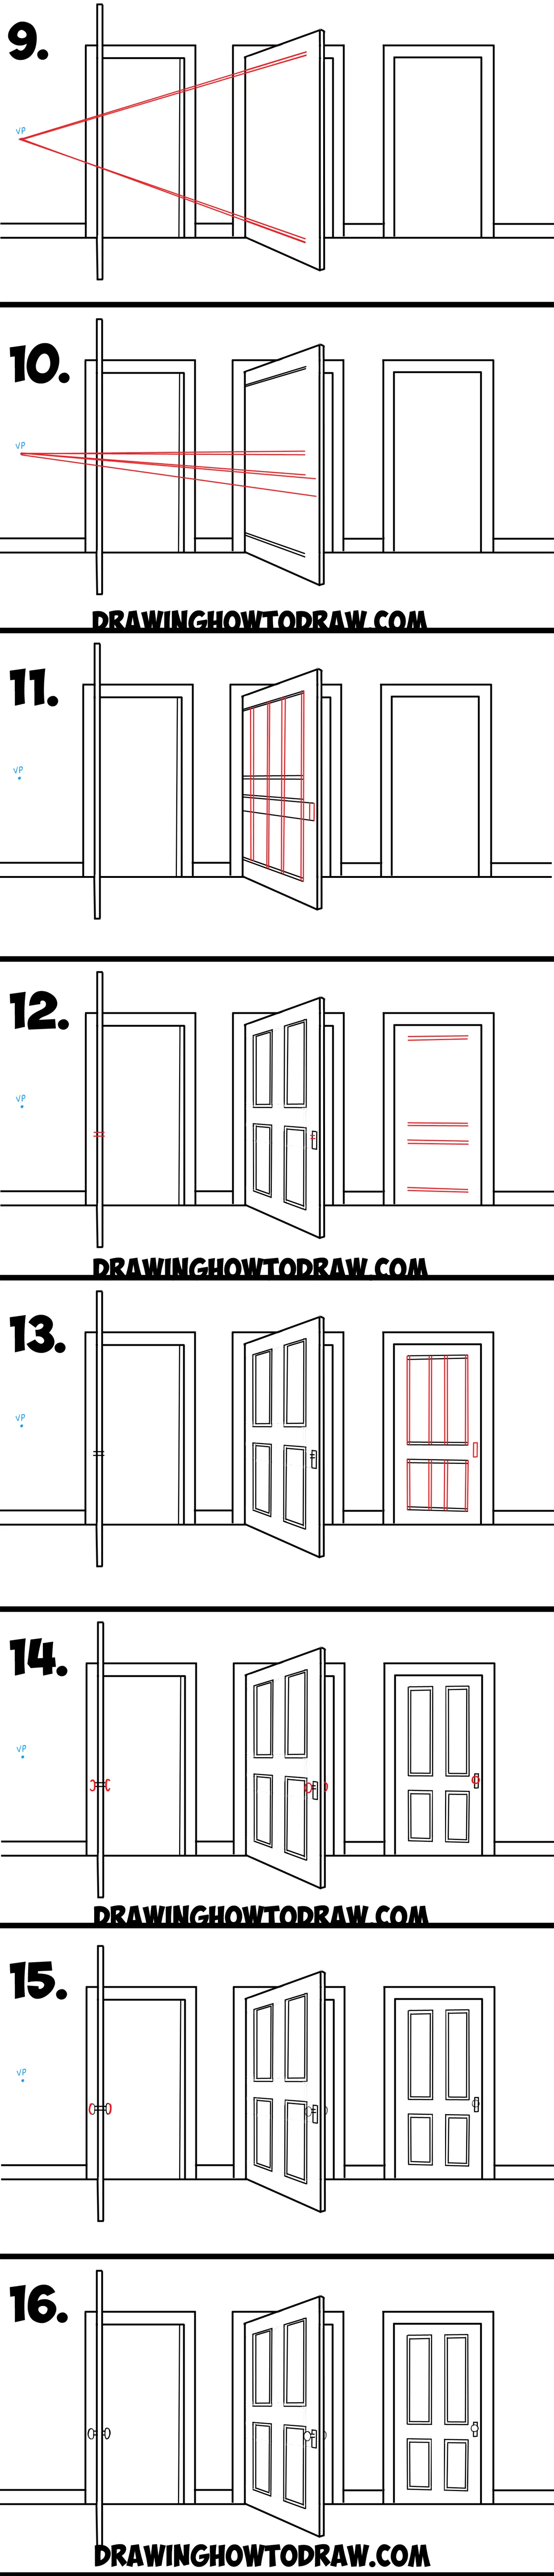 How To Draw Doors Opened Closed In Two Point Perspective Easy Step By Step Drawing Tutorial How To Draw Step By Step Drawing Tutorials